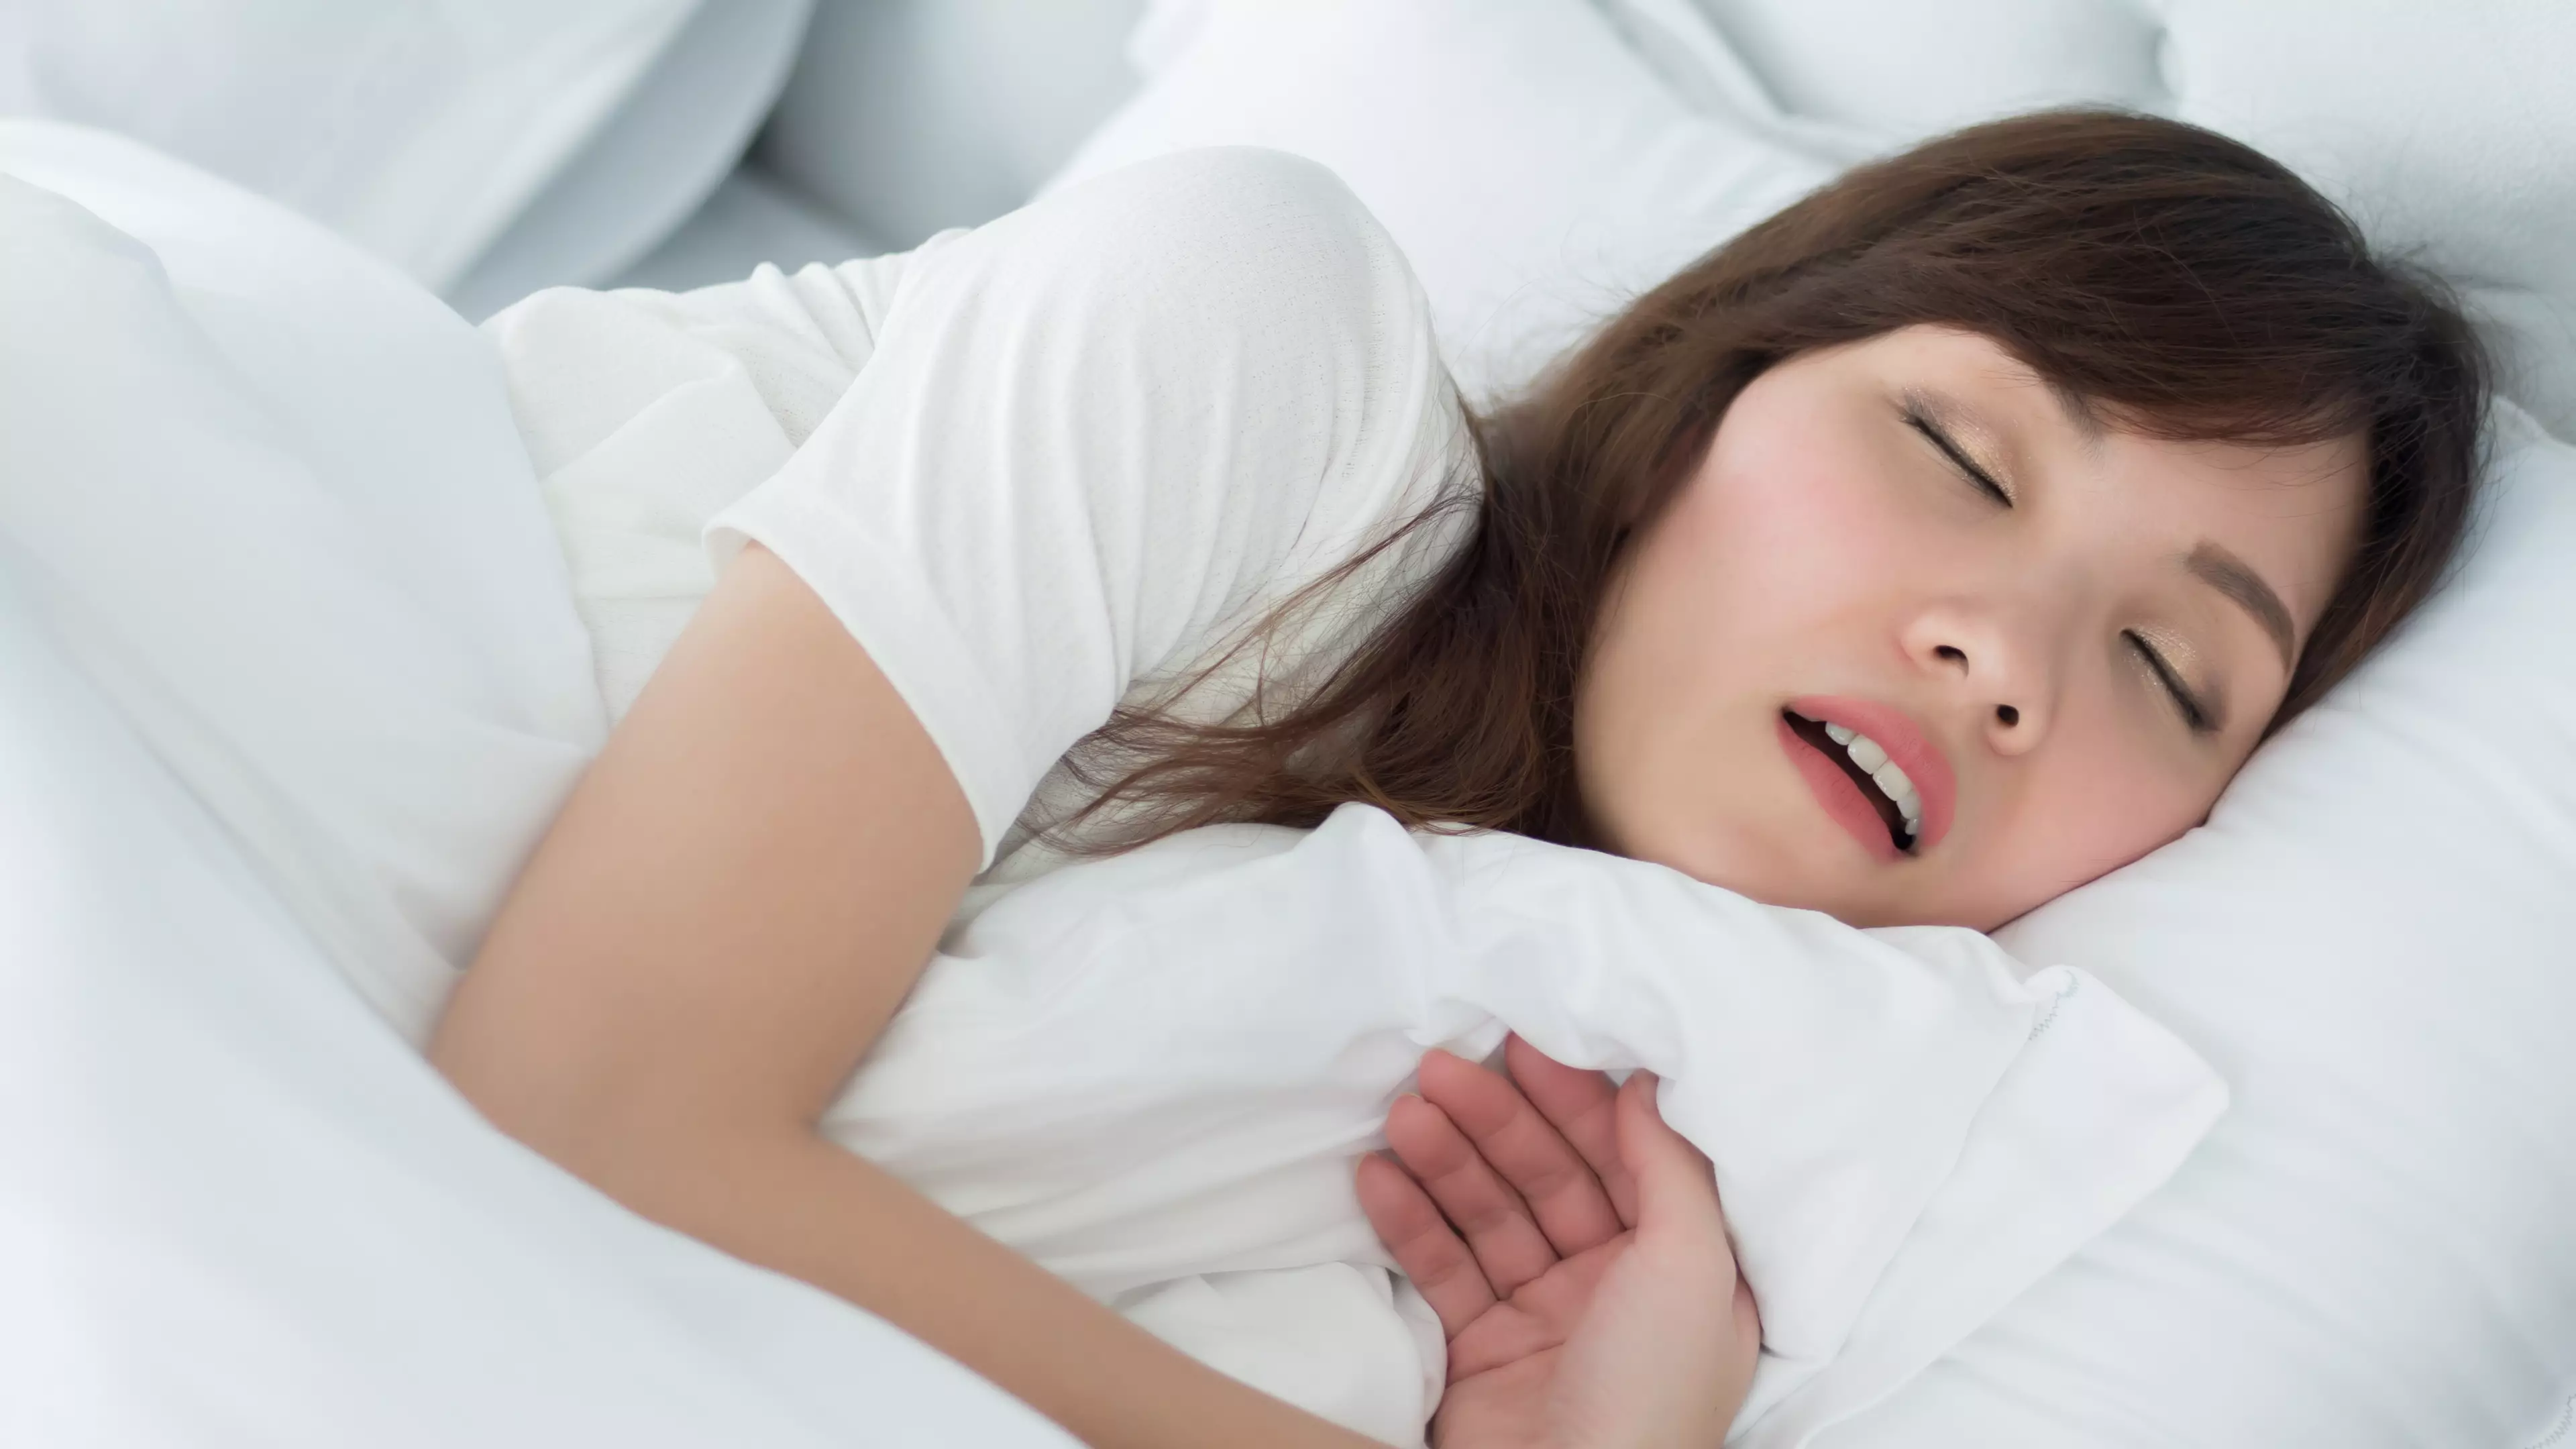 A New TV Show Is Looking For Britain's Loudest Snorers